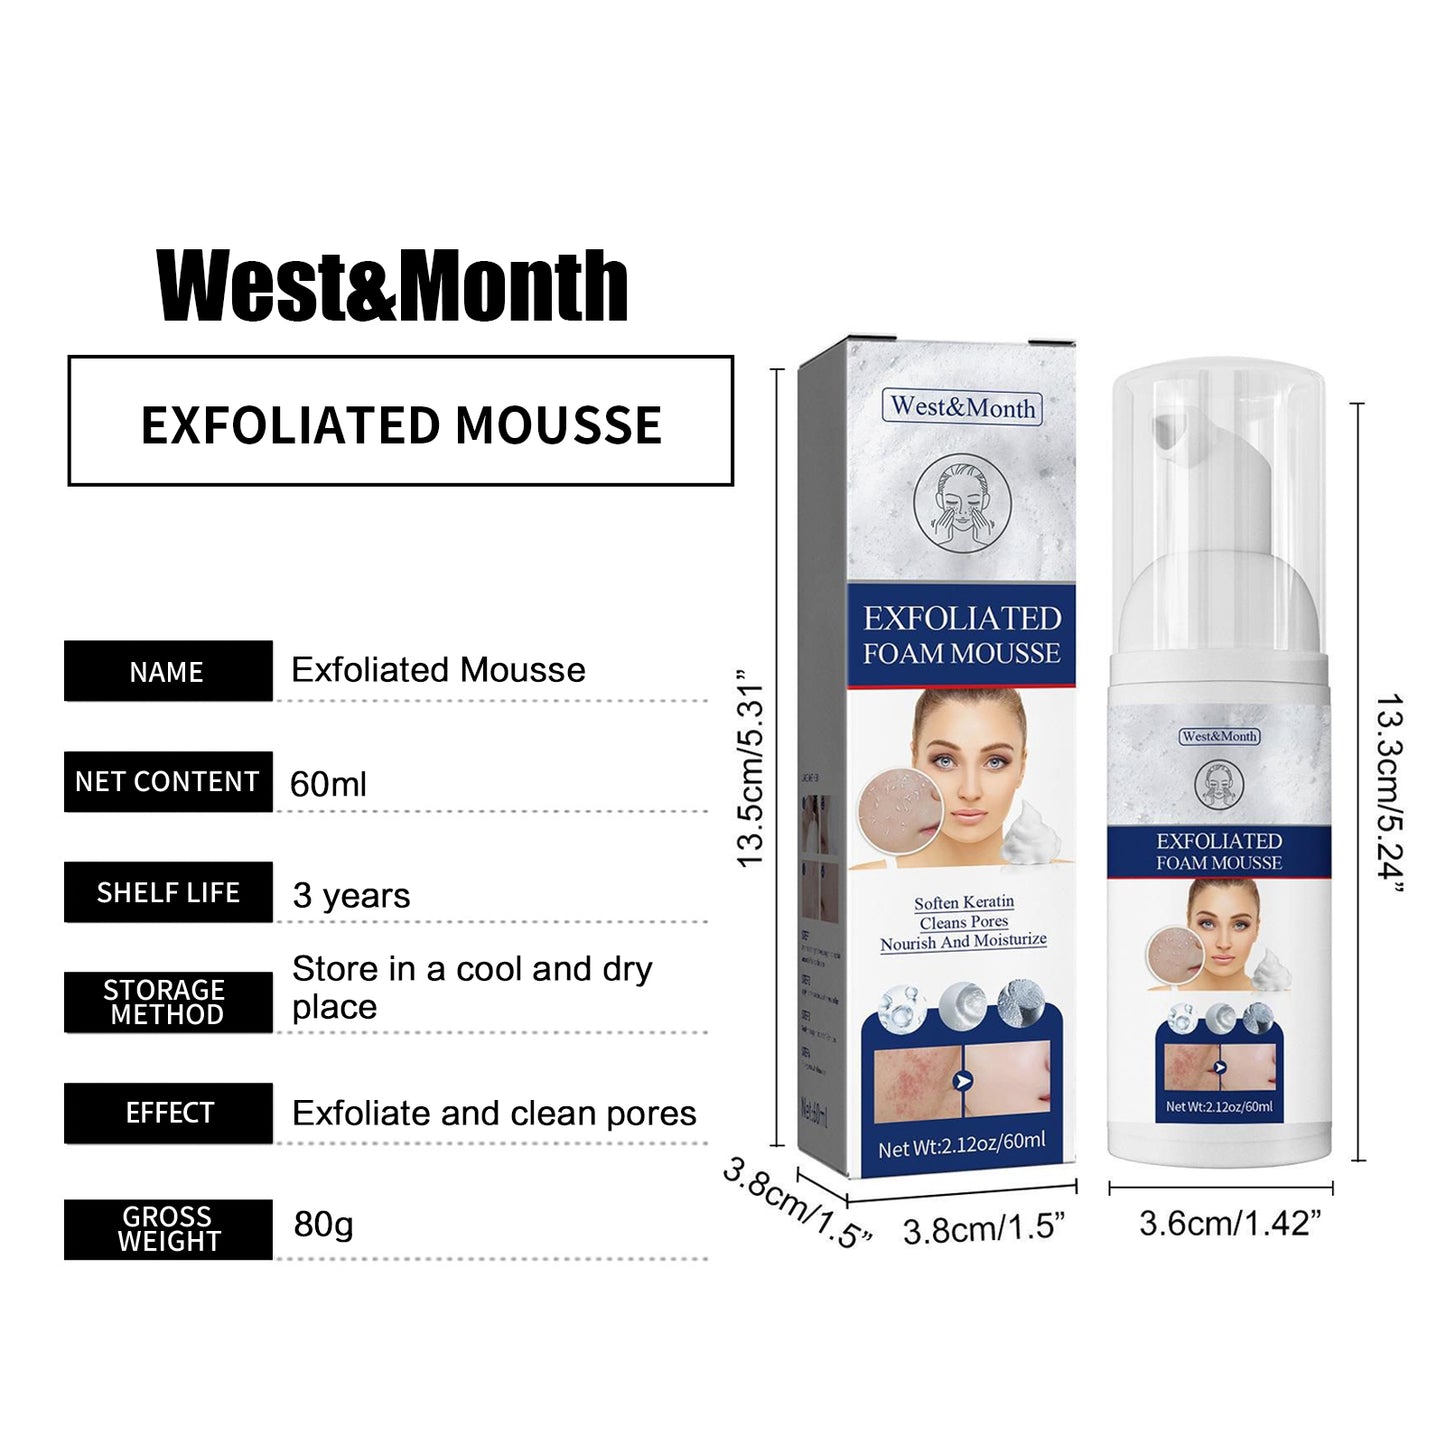 West&Month Facial Exfoliating Foam Mousse Remove Blackheads Moisturizing Dead Skin Gently Clean Pores Oil Control Peeling Smooth Skin Care(60ml)